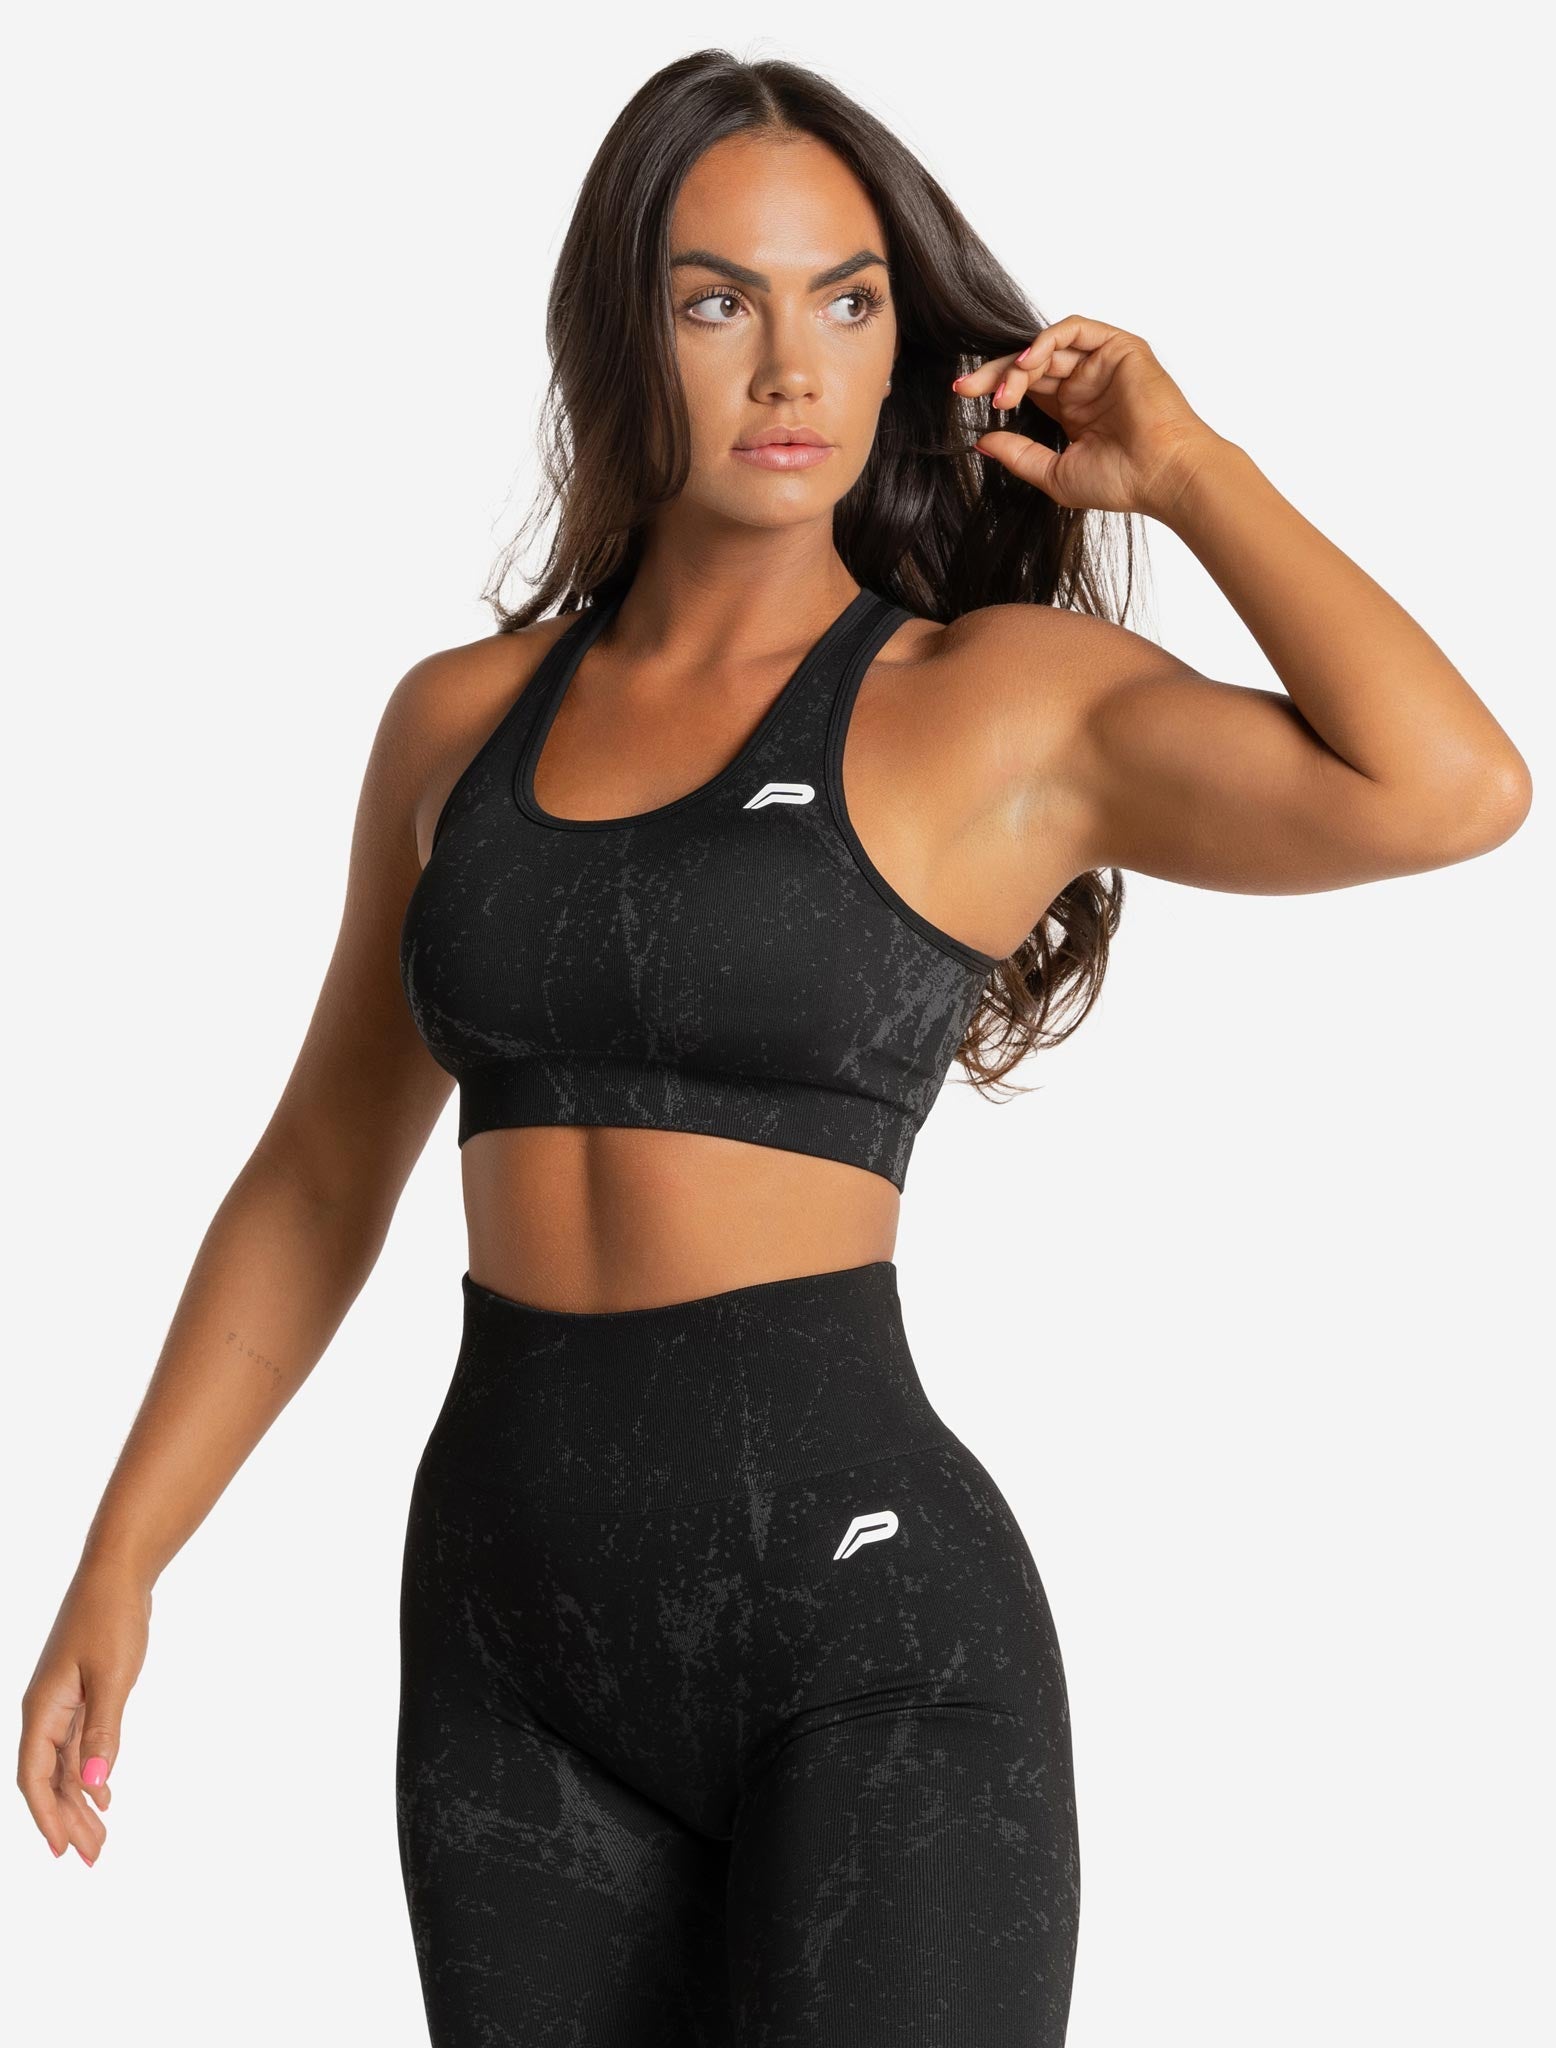 Pursue Fitness - The Iconic Sports-Bra features removable padding for extra  support - styled with Essential Flux Leggings via pursuefitness.co.uk